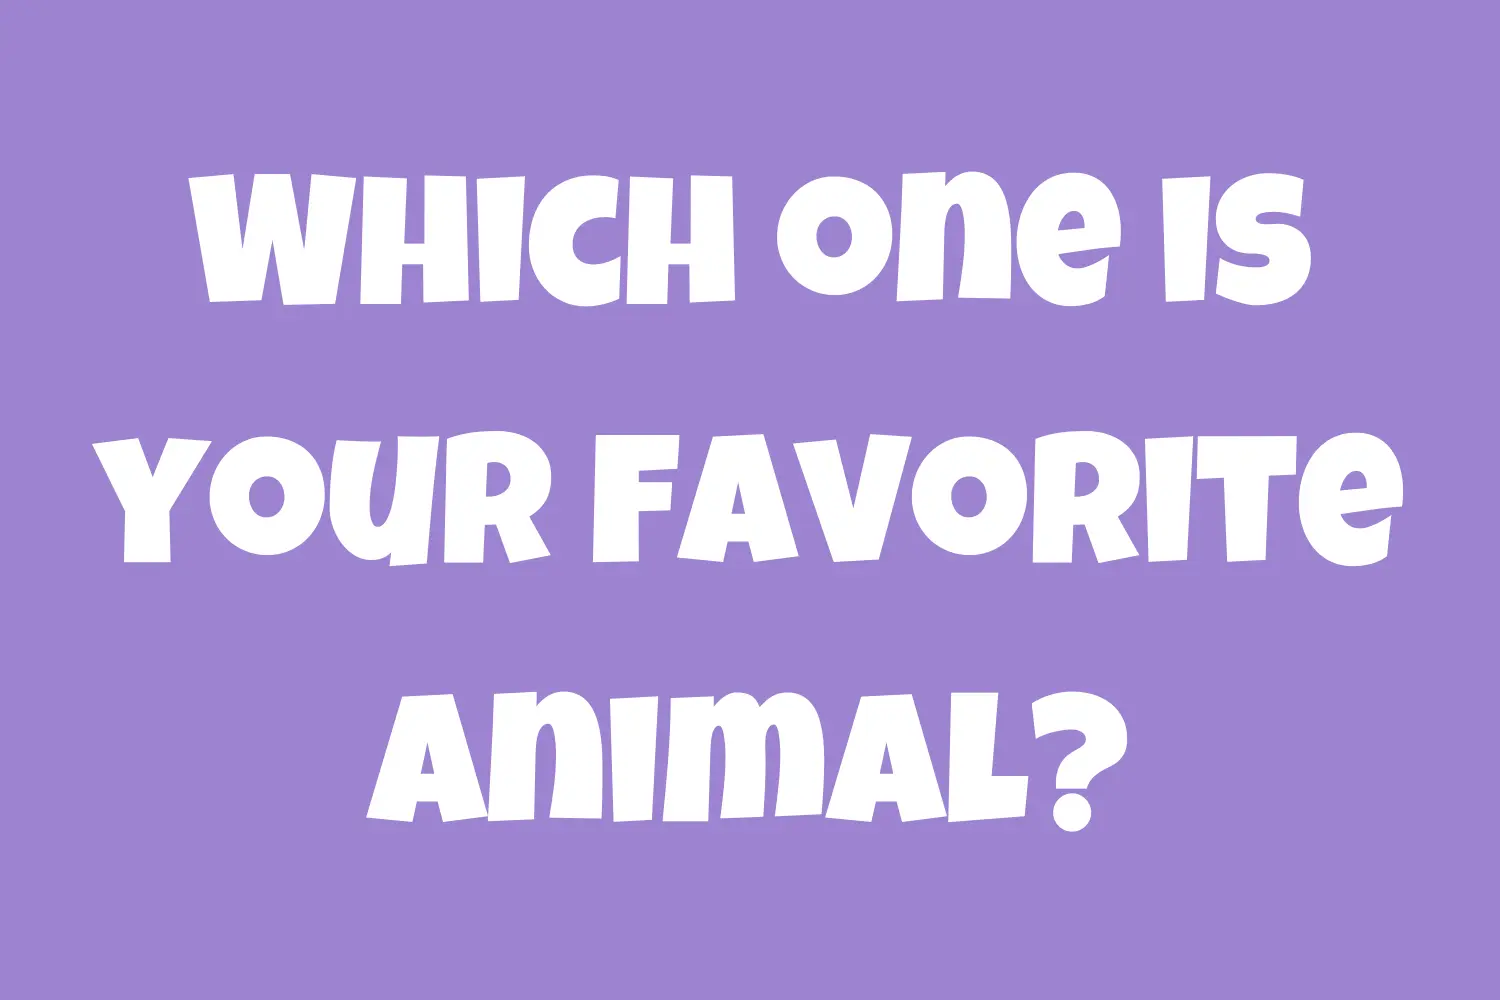 Which one is your favorite animal